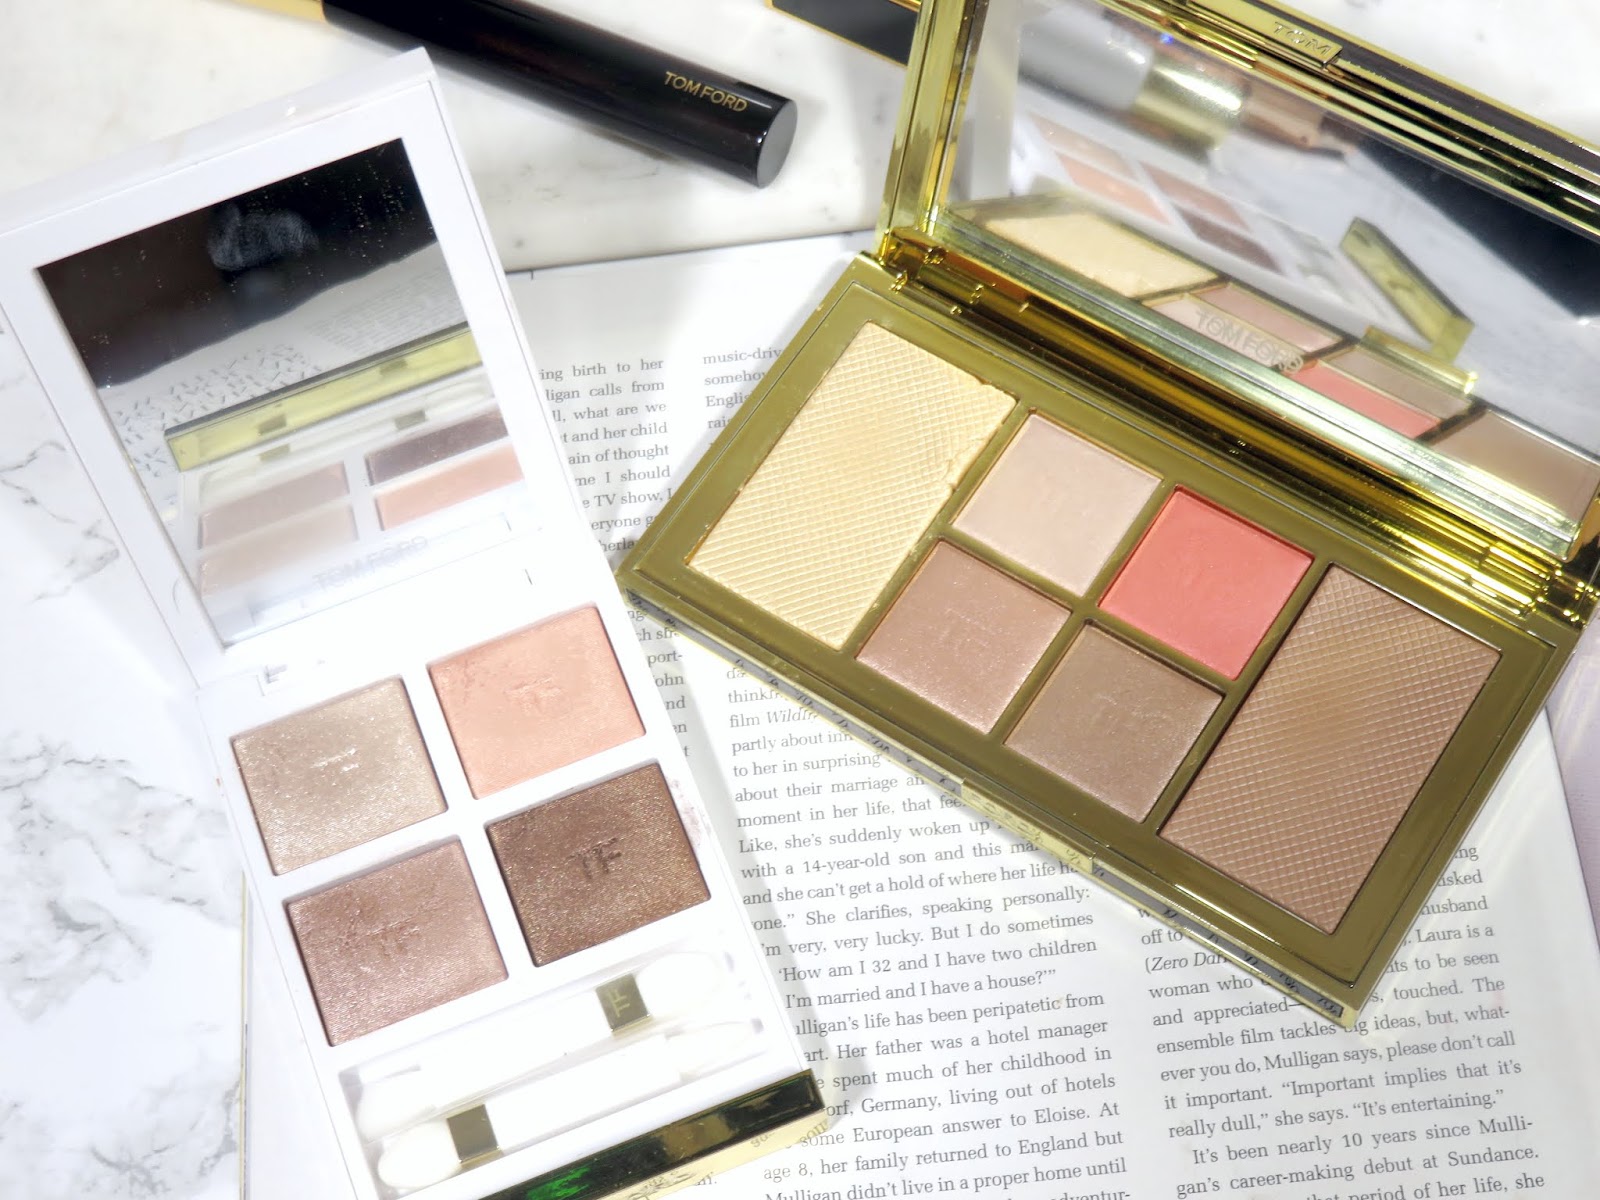 Tom Ford Shade and Illuminate Face & Eye Palette in Rose Cashmere Review and Swatches